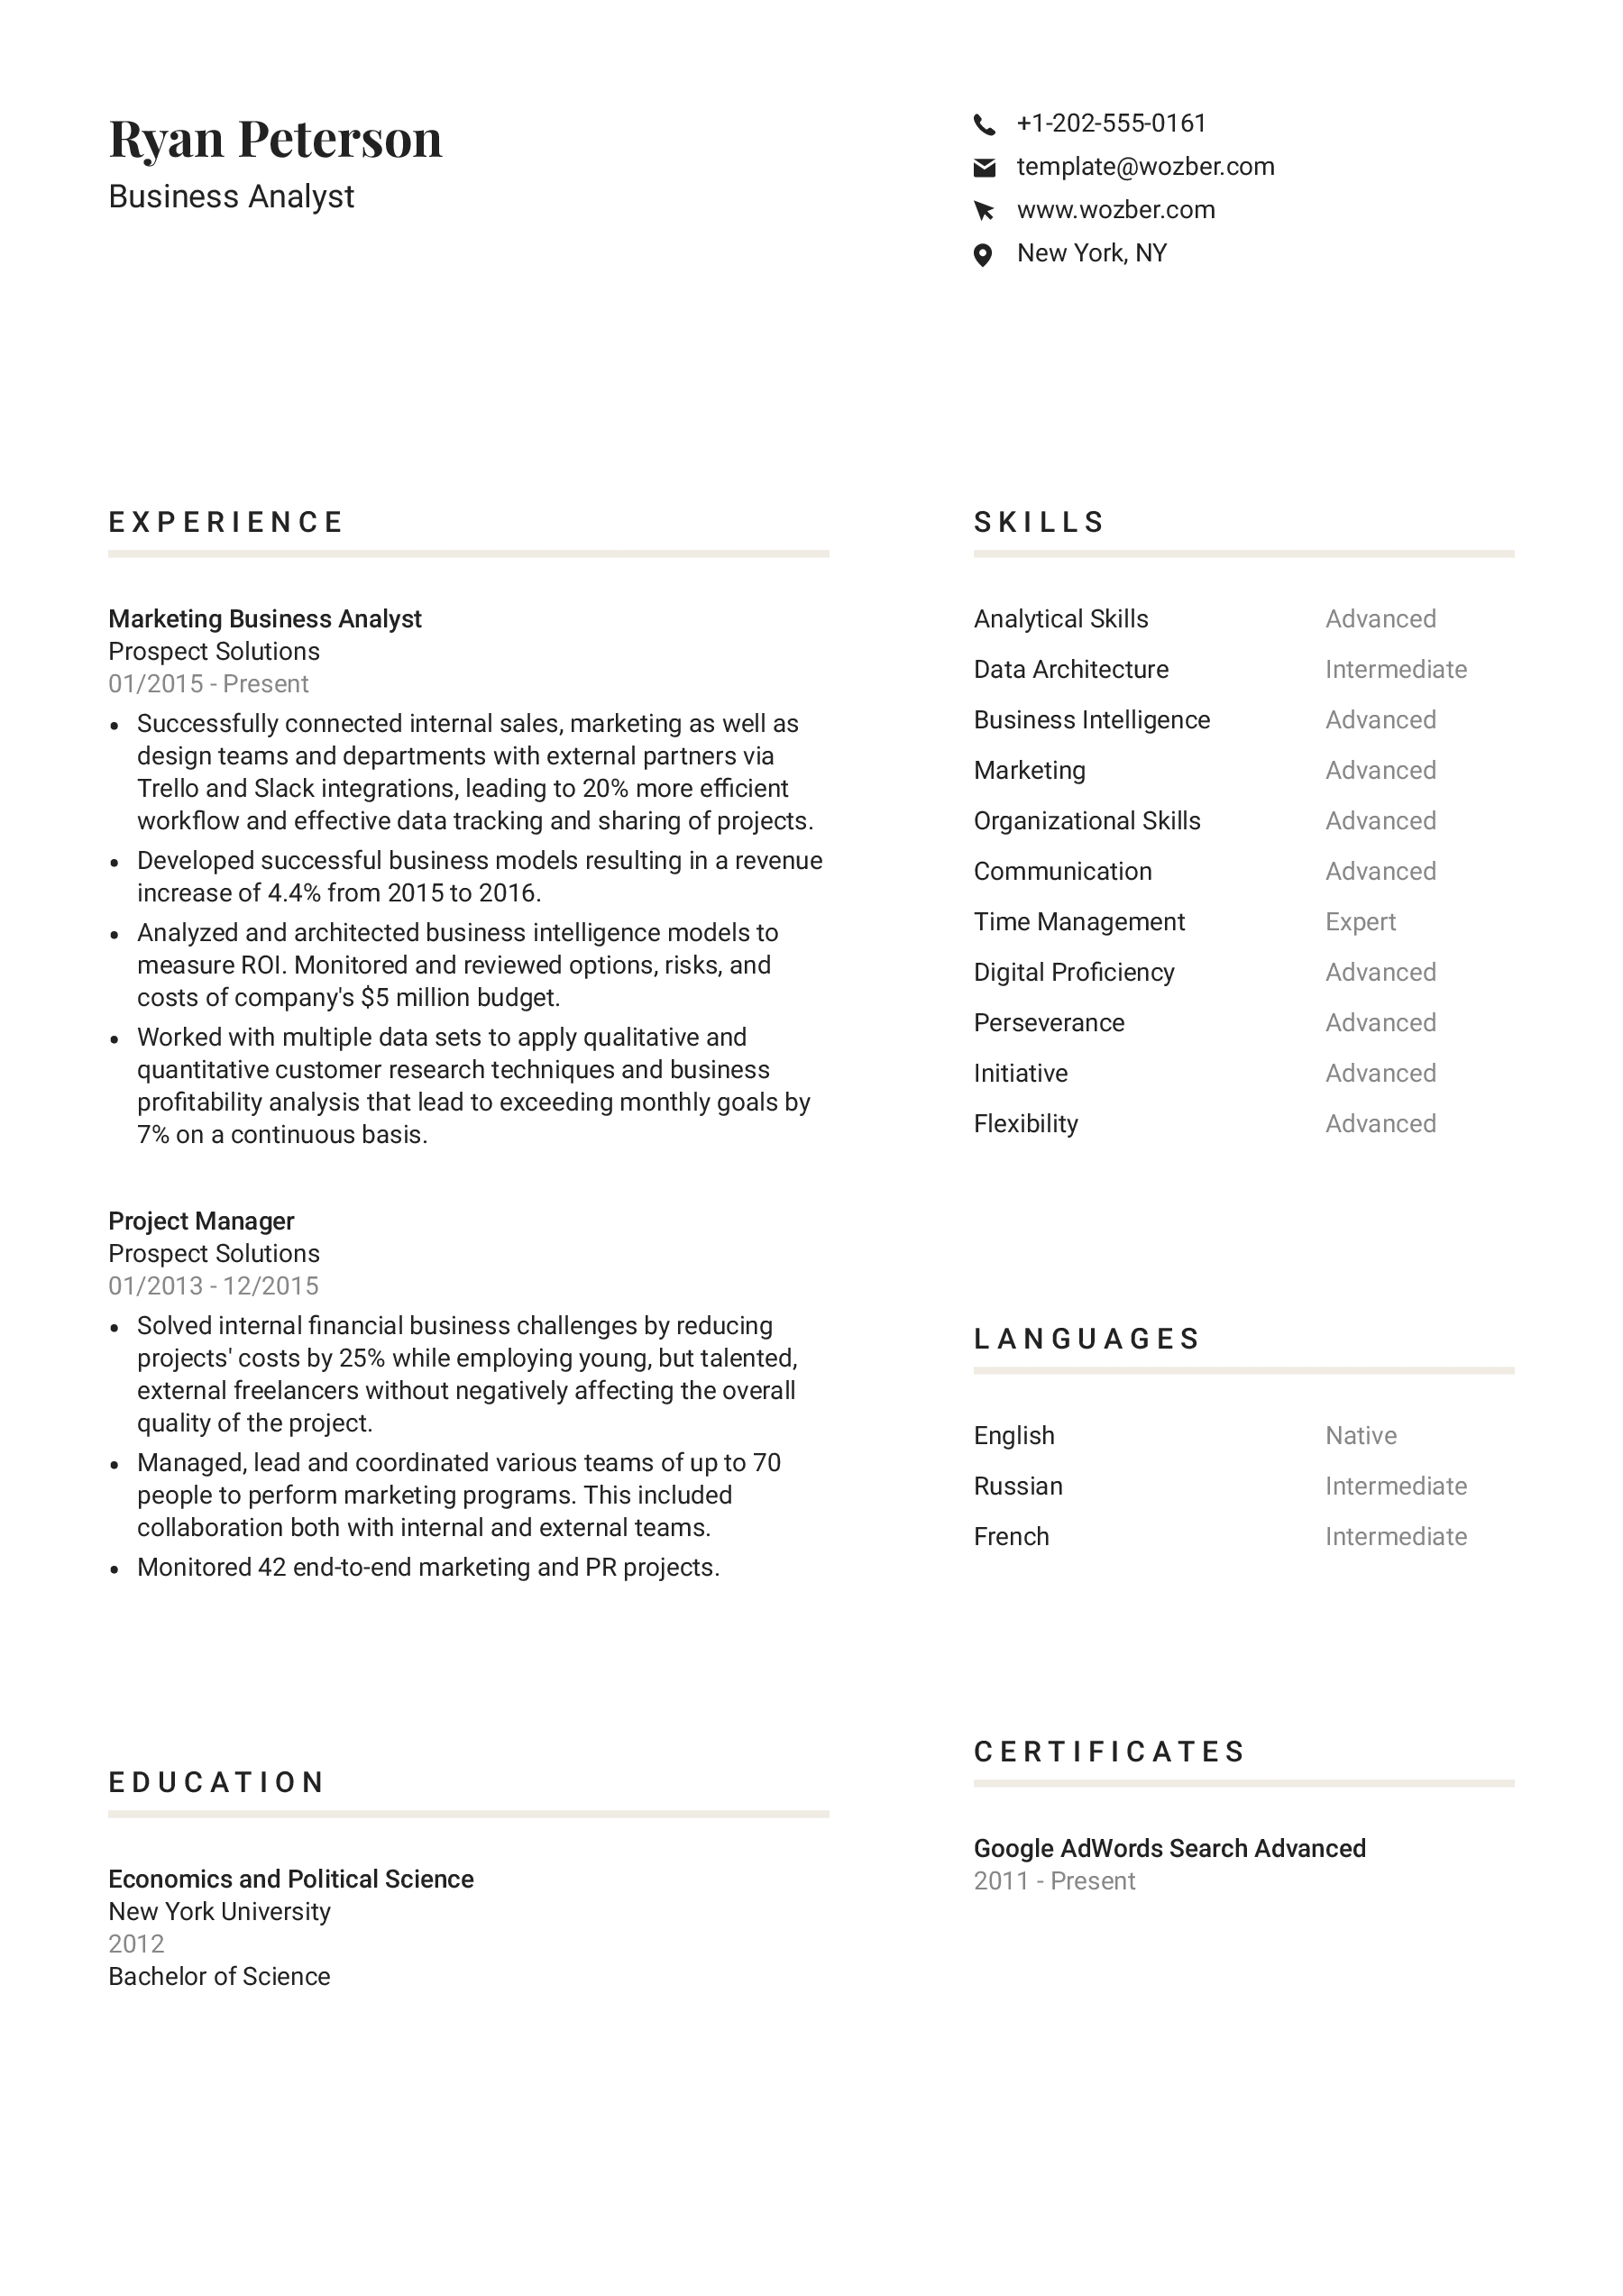 A professional, solid resume template with a two-column layout.